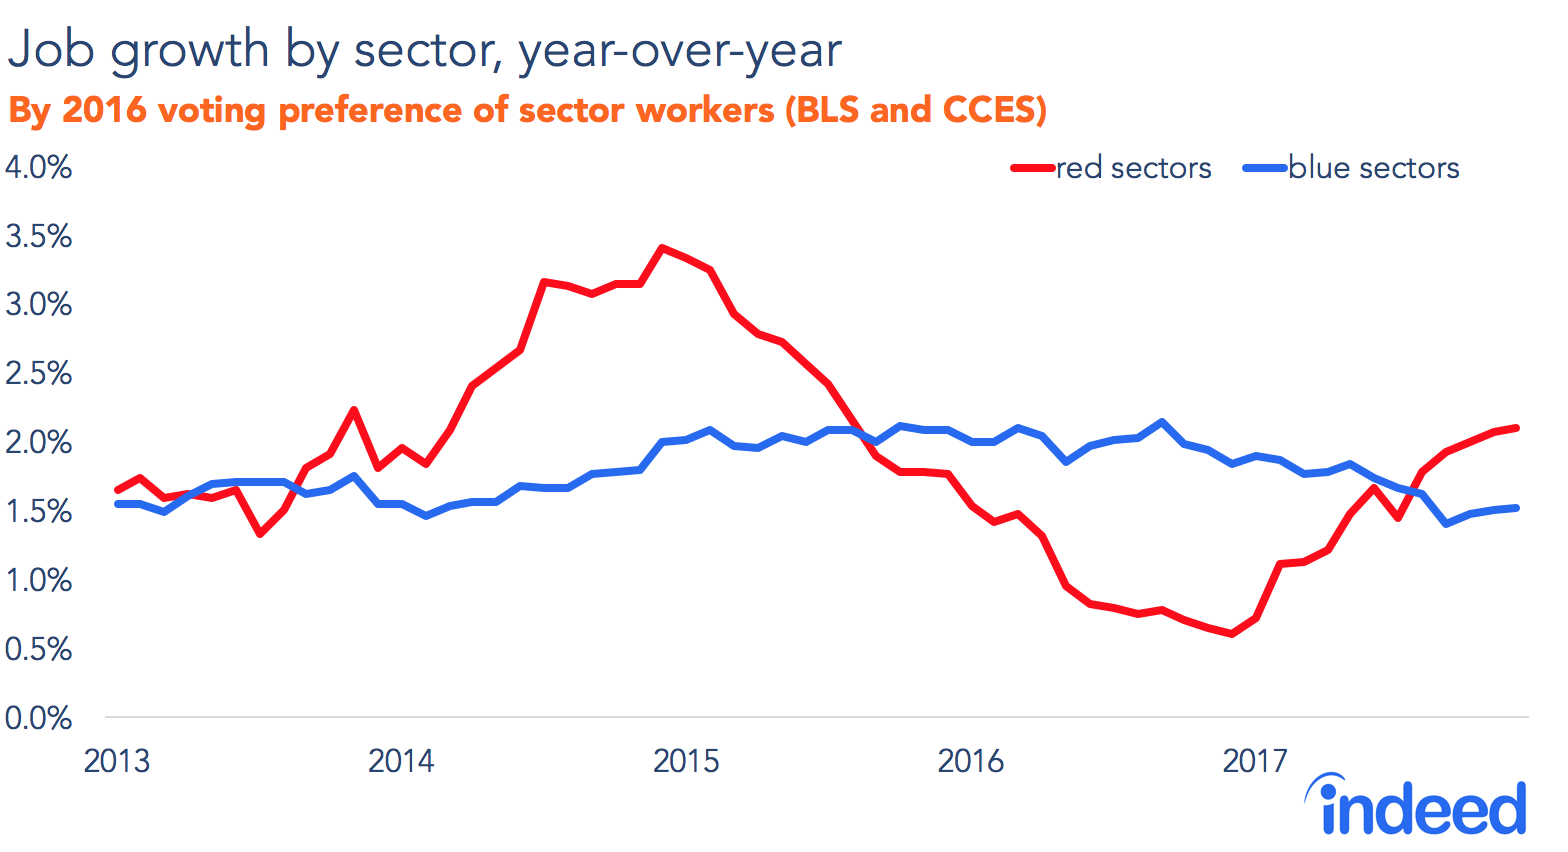 Line graph shows job growth by sector, year-over-year.